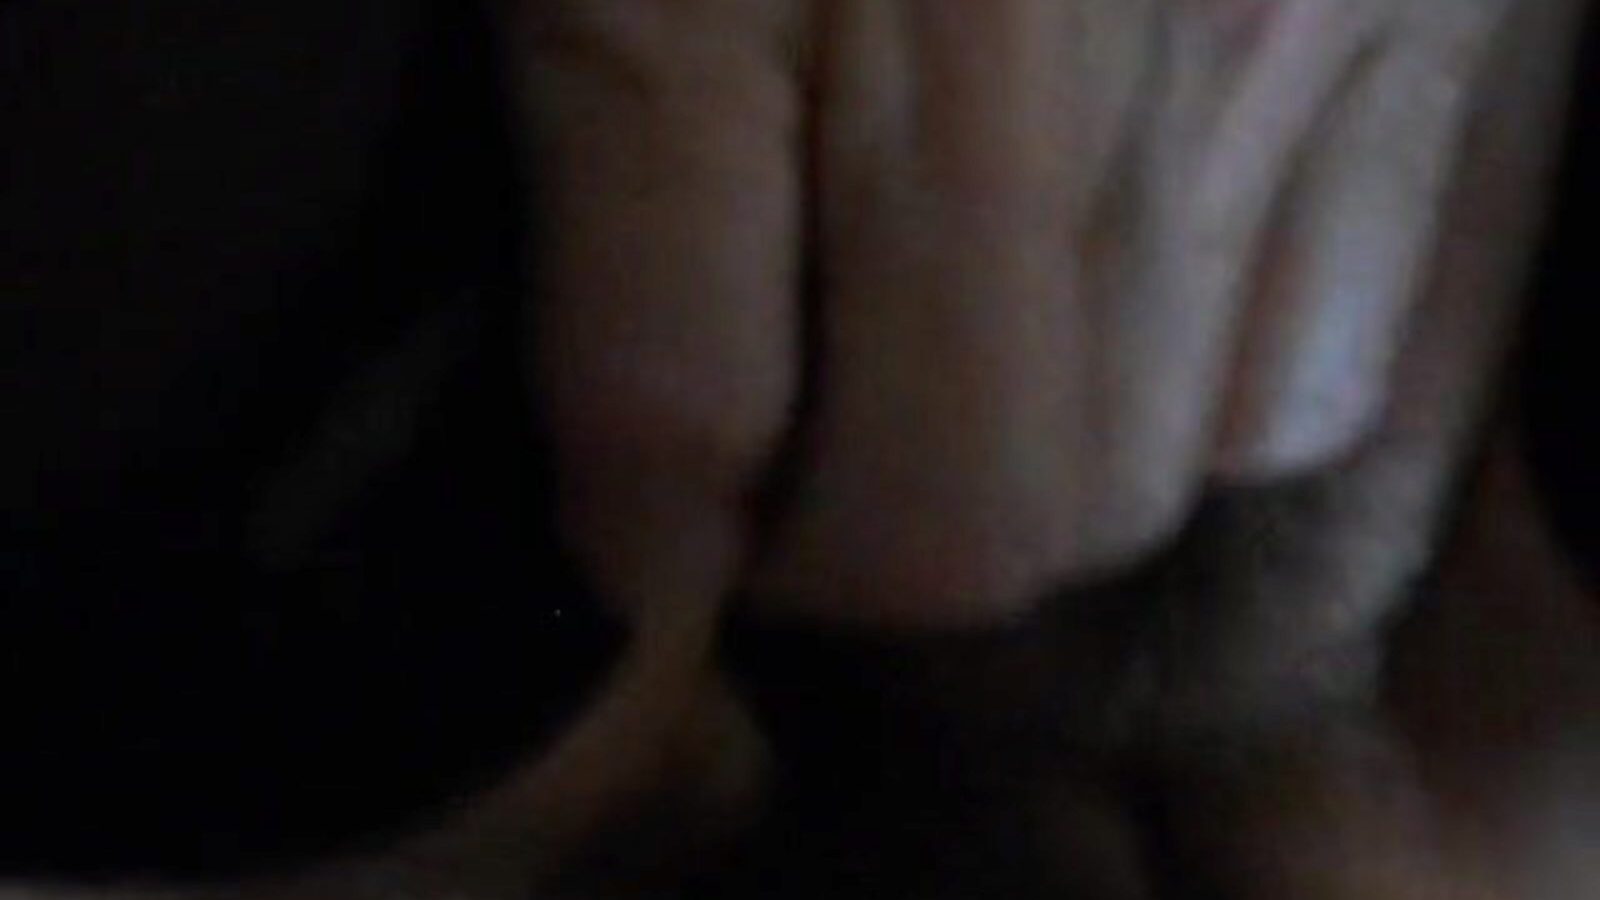 parting pants for wet crack wifey parts her pants to get drilled in her curly slit then she widens it for jizz Camera work is a bit shaky previous to cumshot